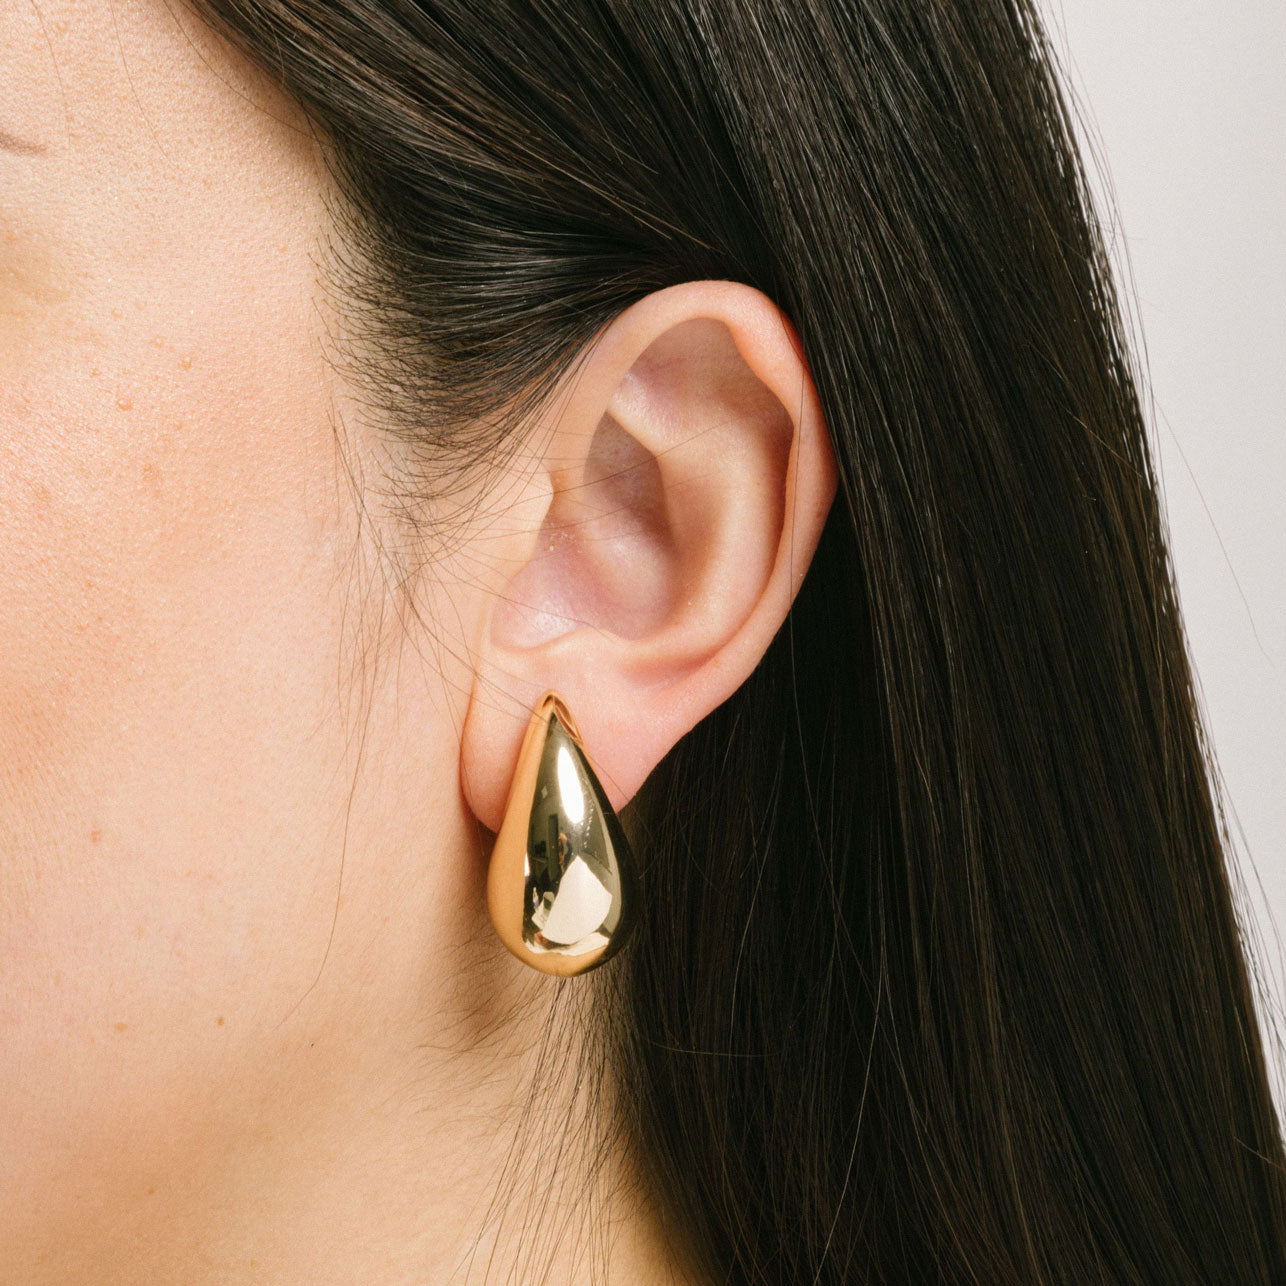 A model wearing the Isla Clip On Earrings in Gold feature a secure screwback closure that fits all ear types, providing an average comfortable wear duration of 8 - 12 hours. The hold strength is strong and you can manually adjust the earrings to your ear size. Constructed of gold toned copper alloy, this item is a single pair.